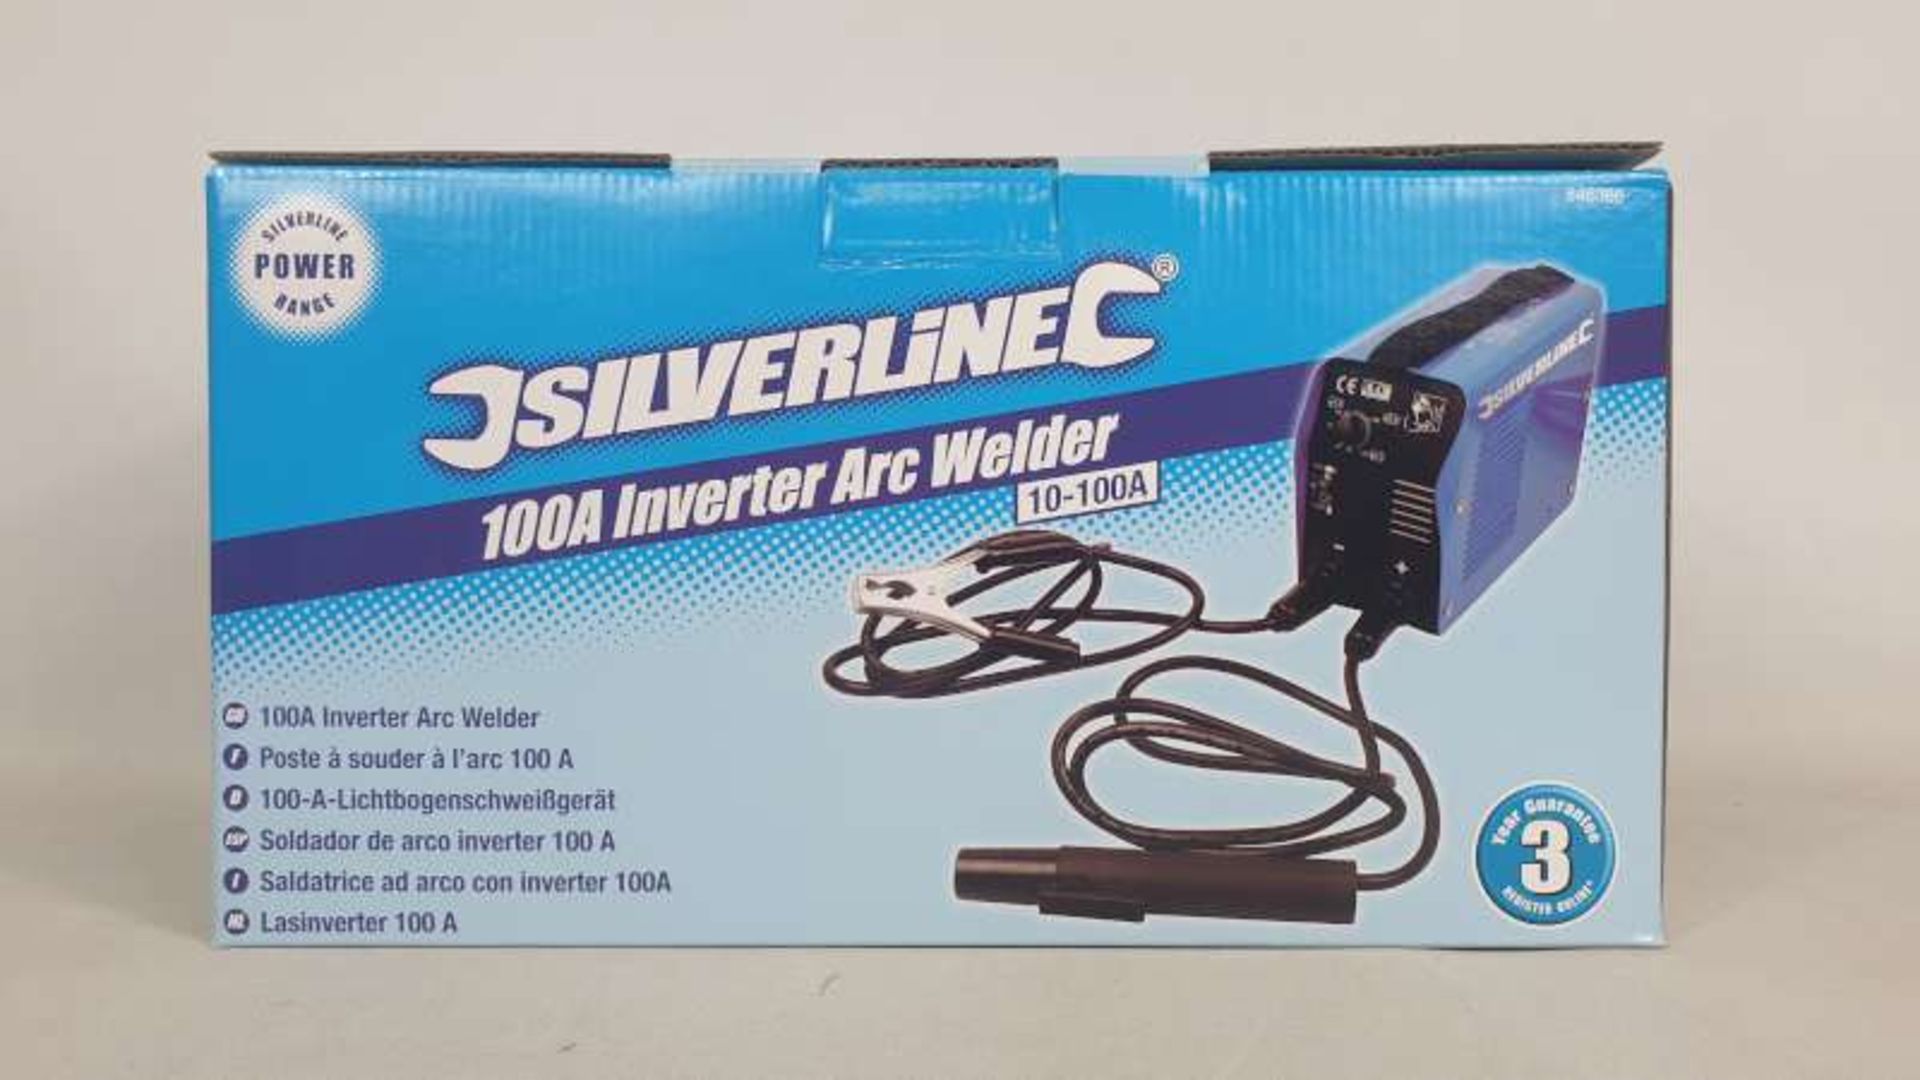 BRAND NEW BOXED SILVERLINE INVERTED ARC WELDER 10-100A WITH 3 YEAR GUARATEE